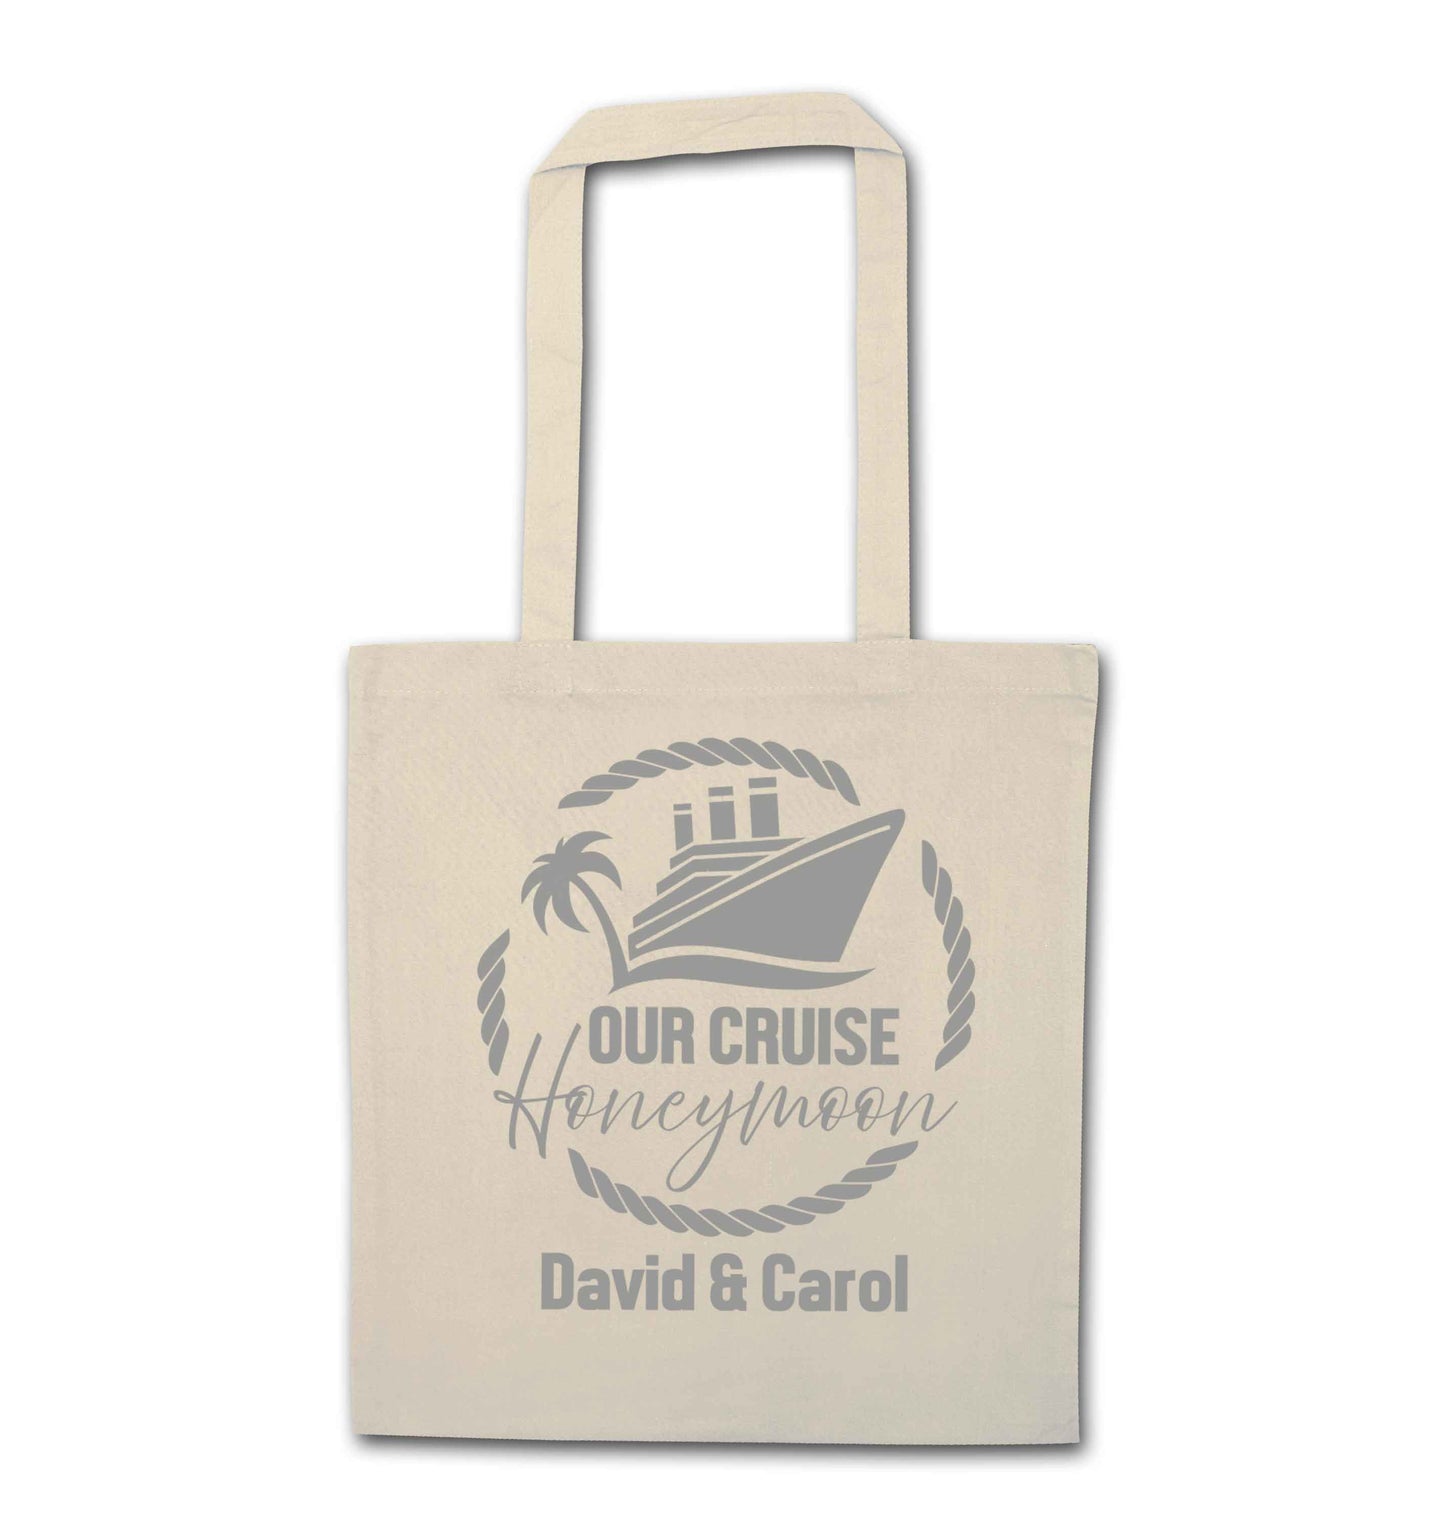 Our cruise honeymoon personalised natural tote bag